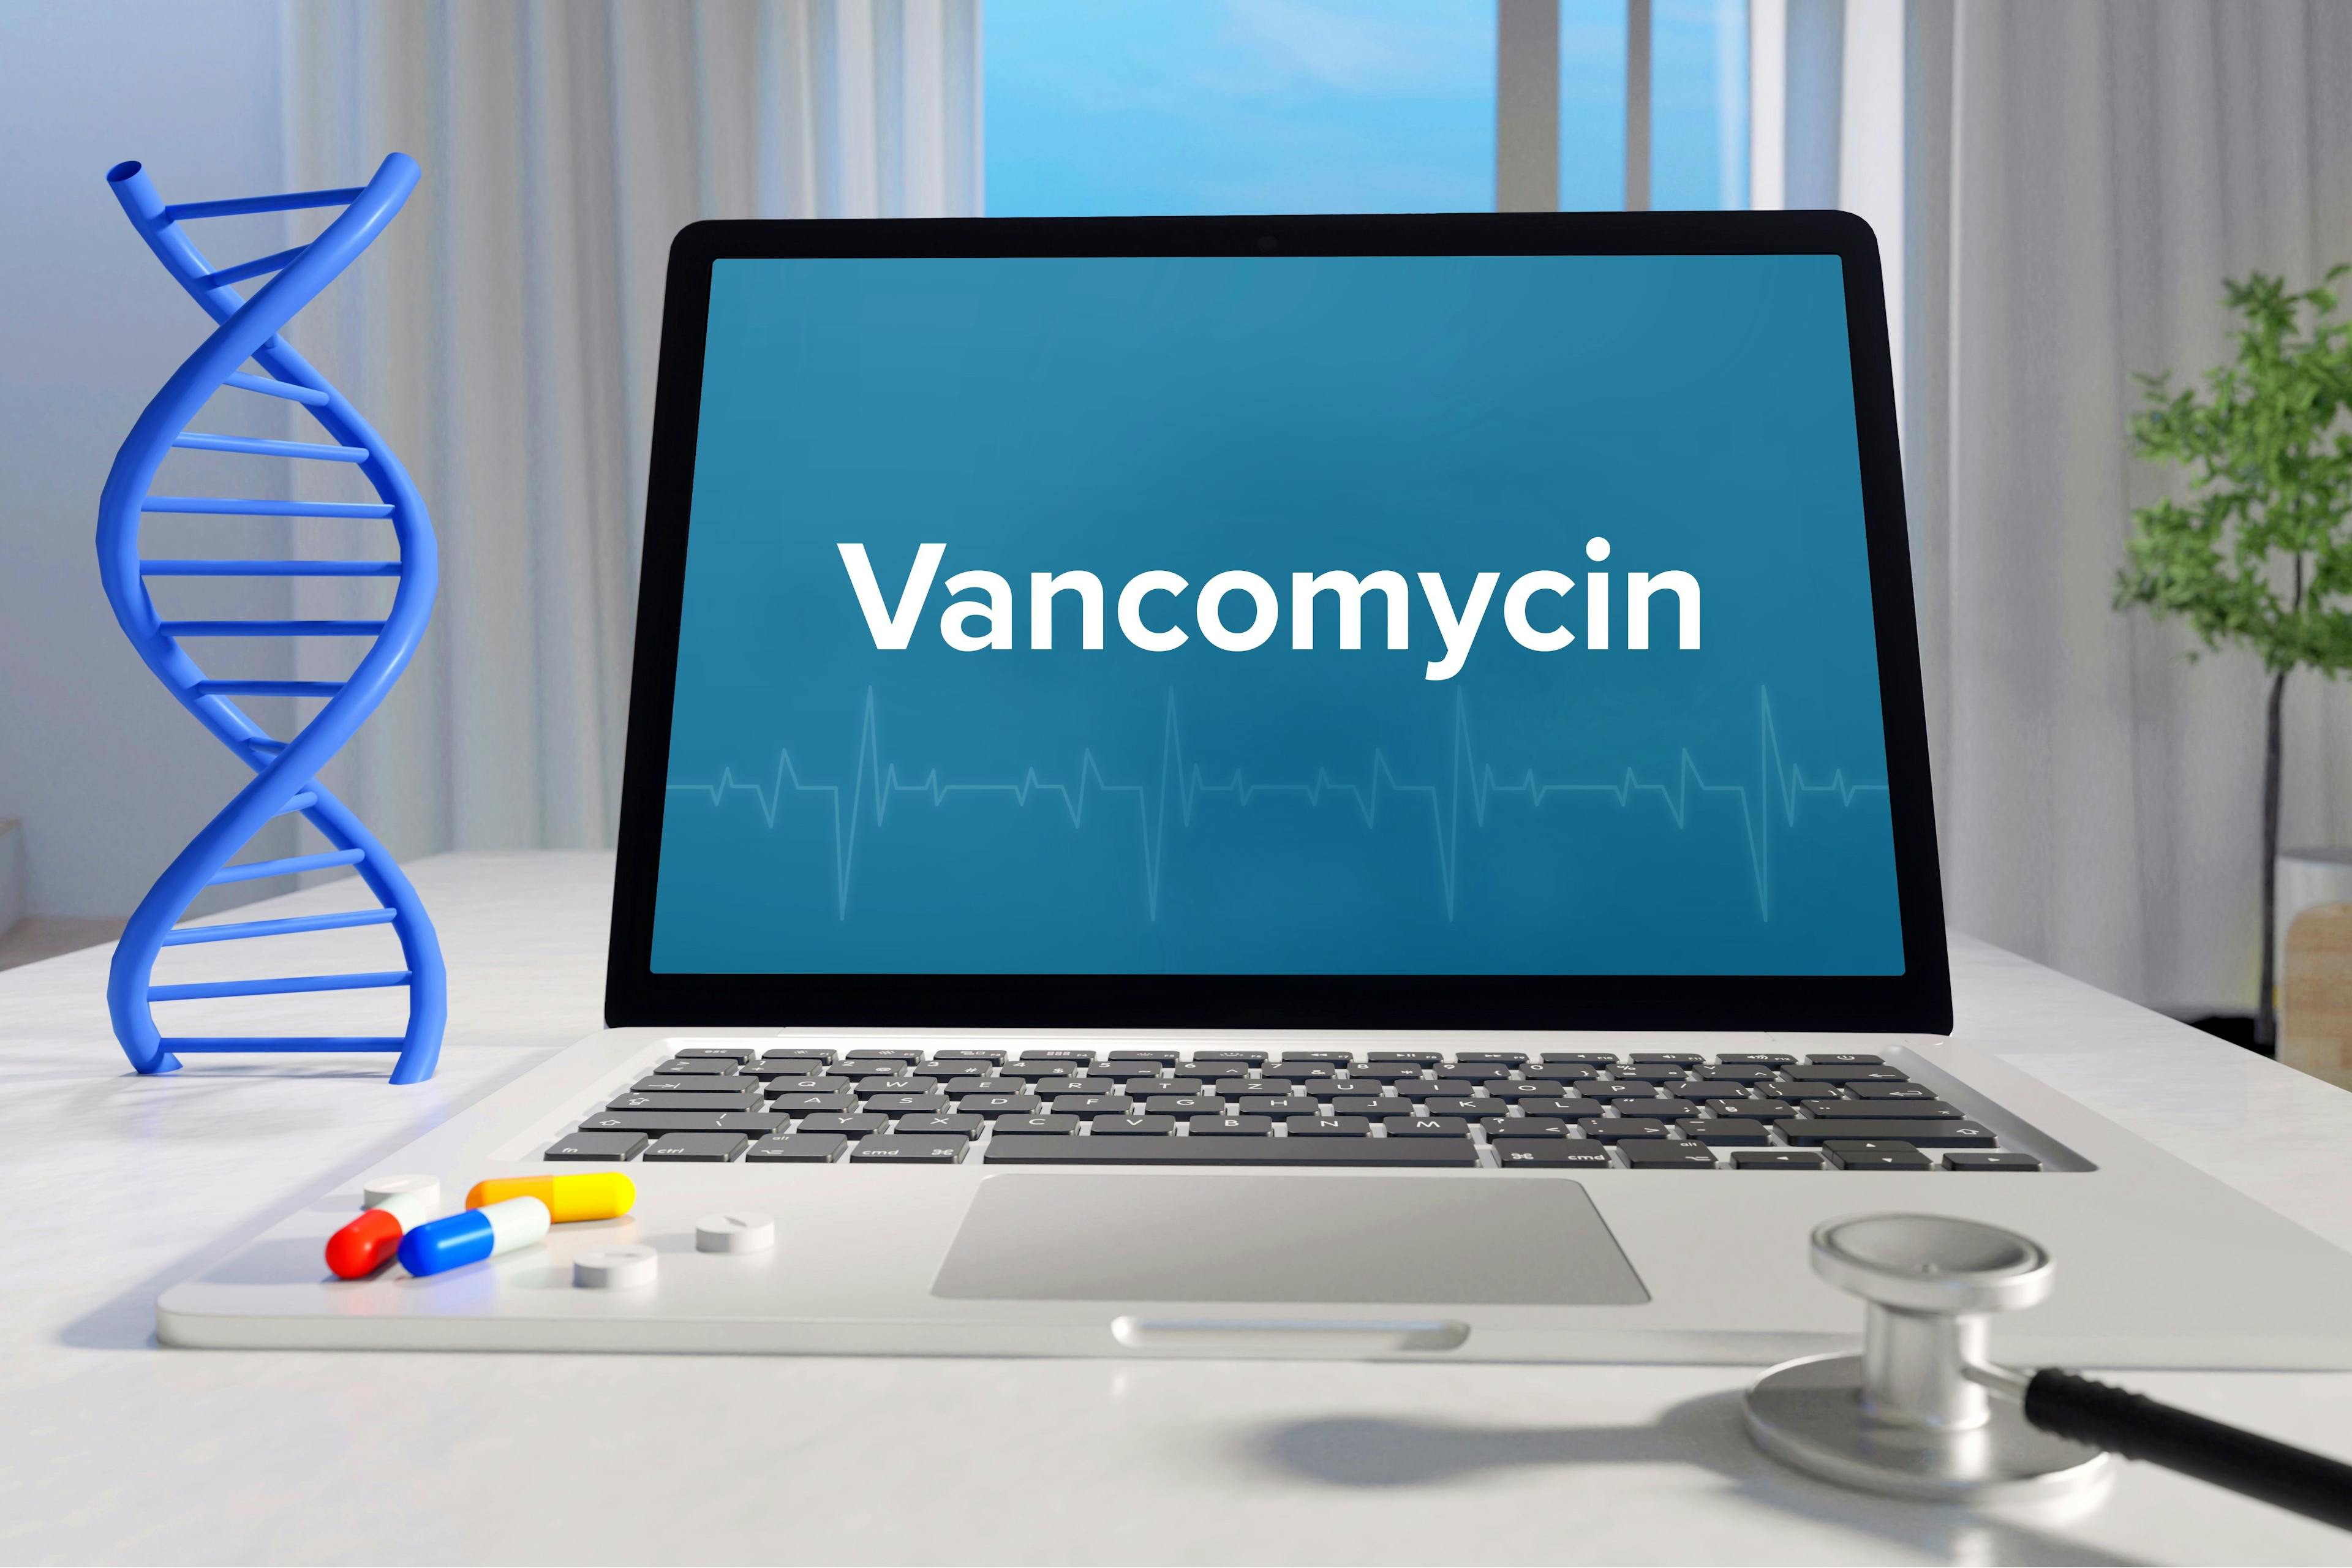 This study found a high proportion of reduced vancomycin susceptibility in C difficile patients, leading to lower rates of sustained clinical response.